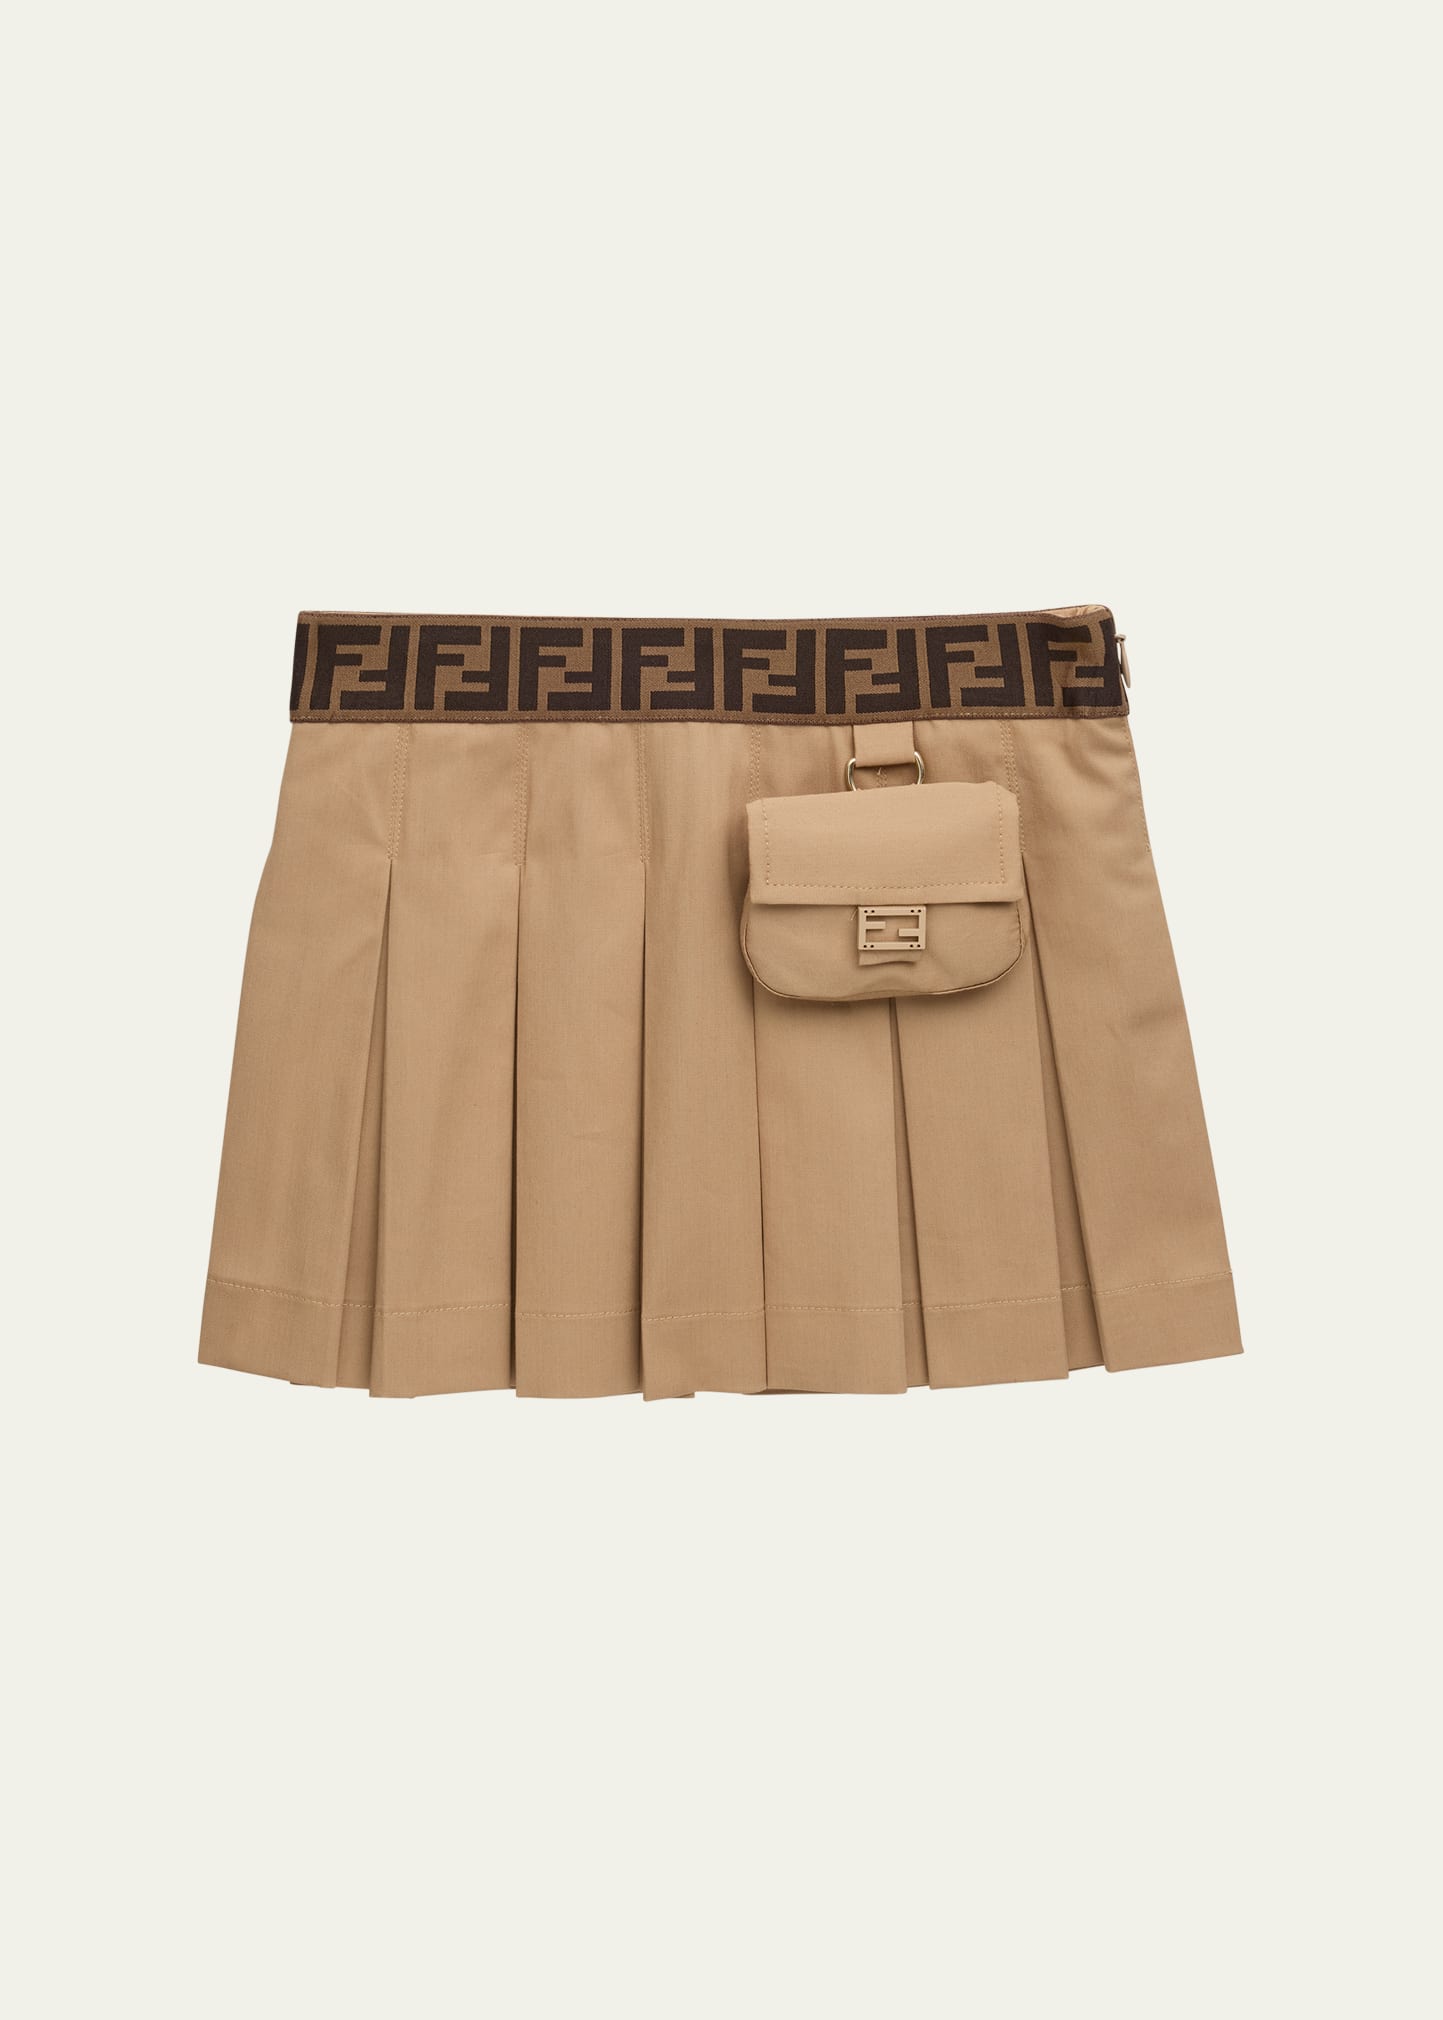 Fendi Kids' Girl's Pleated Ff Mini Skirt With Pouch In Brown